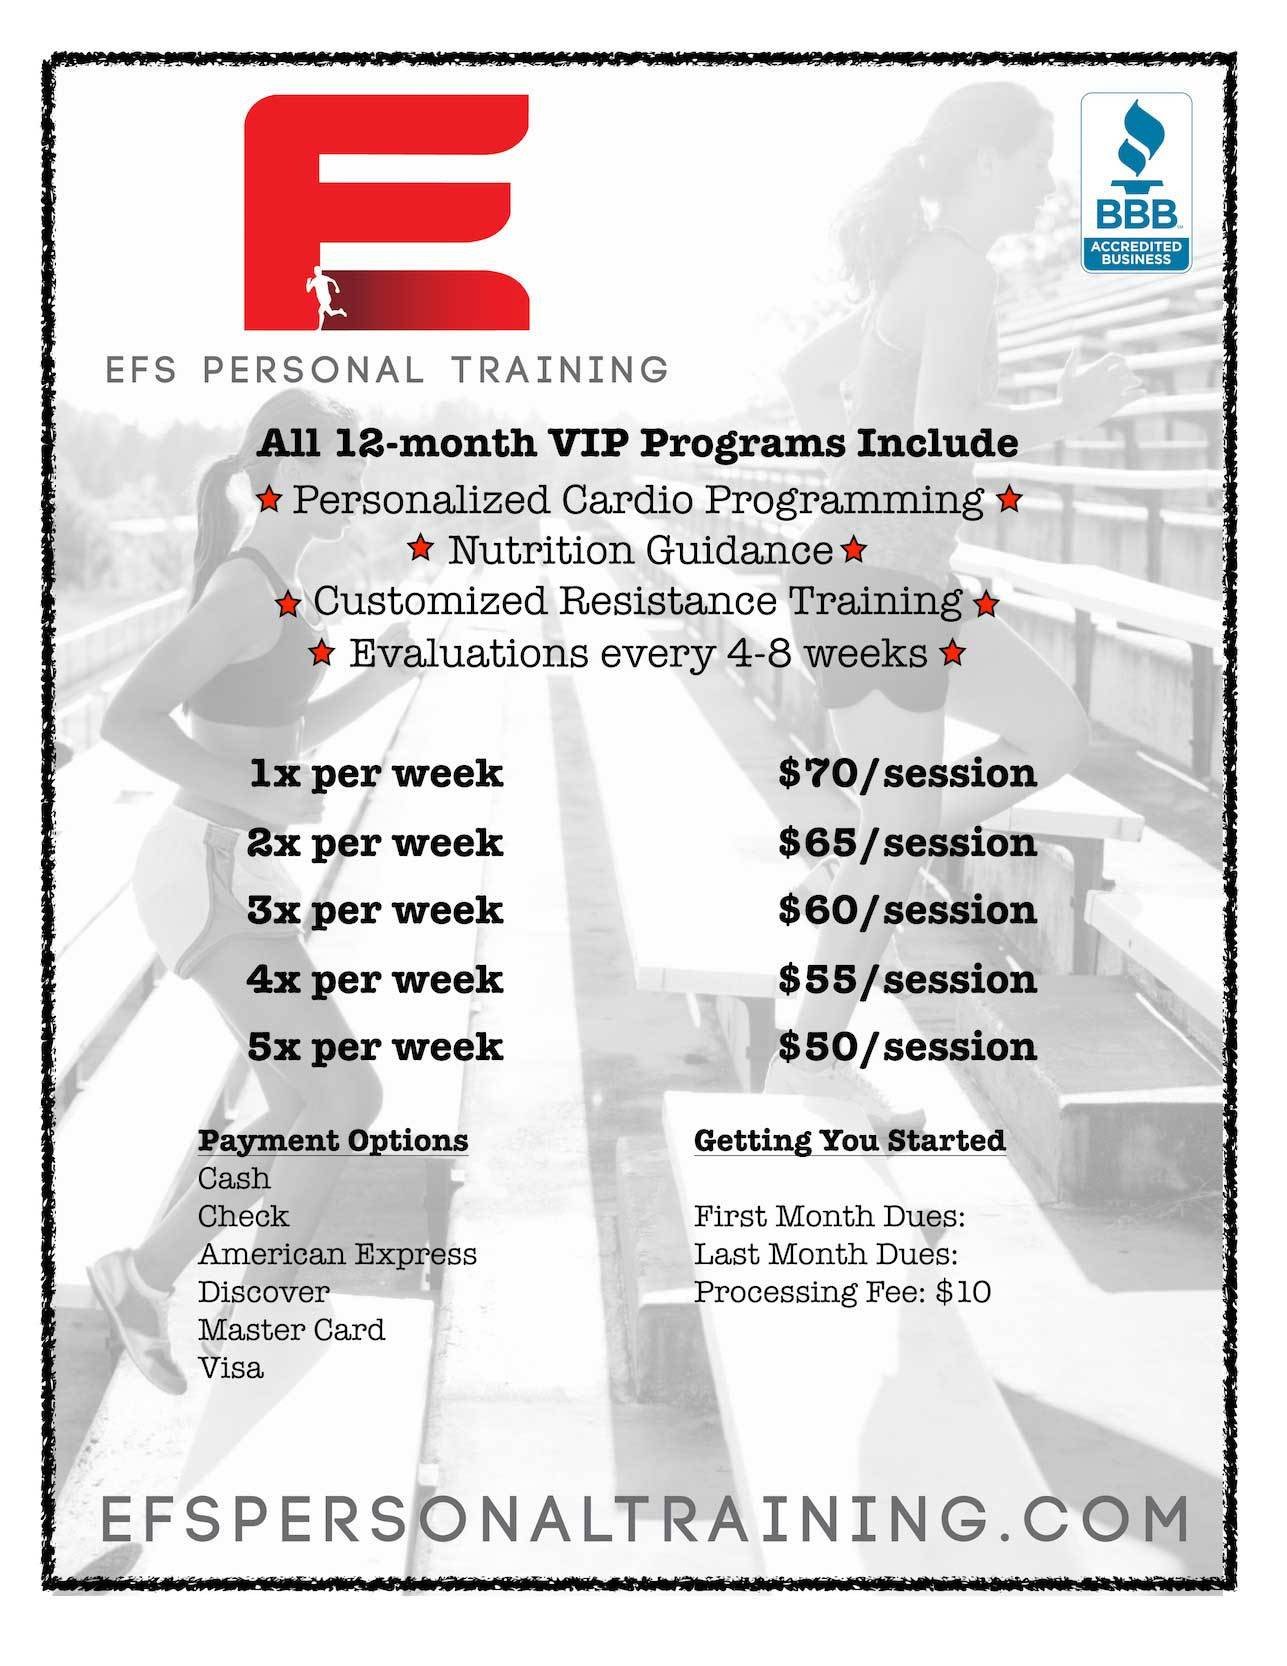 EFS Personal Training Rates and Packages